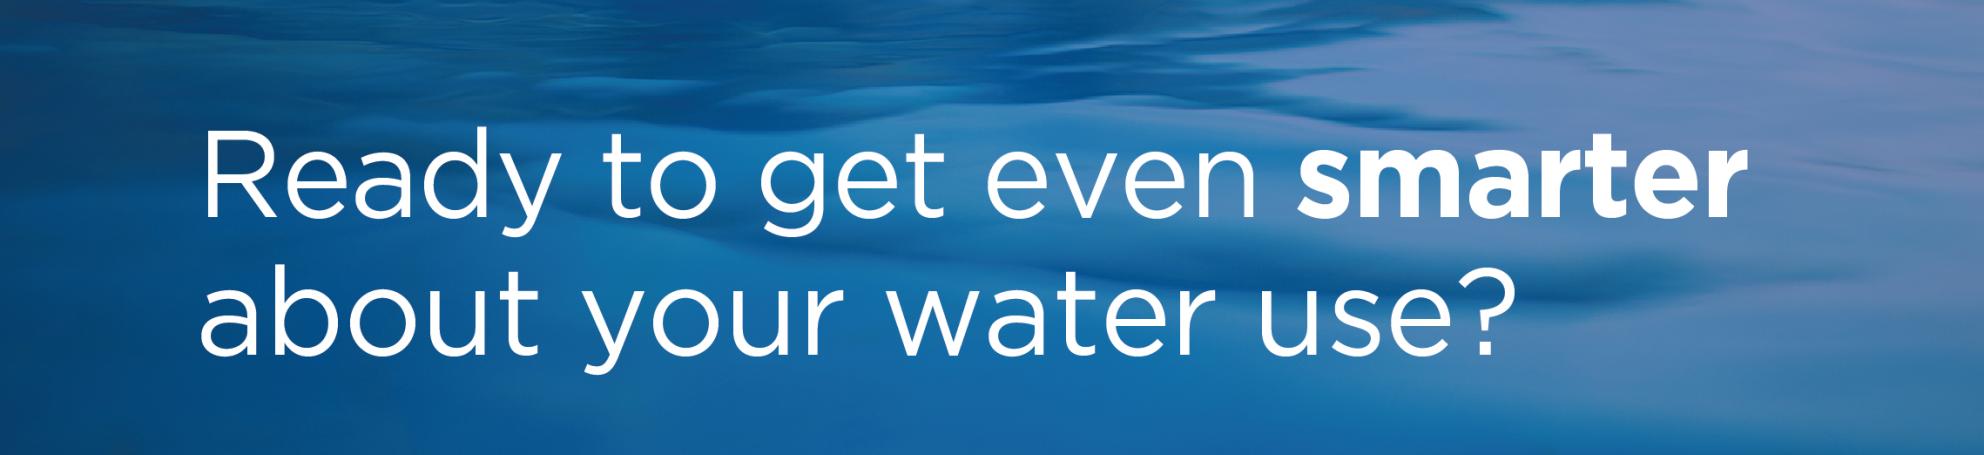 Ready to get even smarter about your water use?